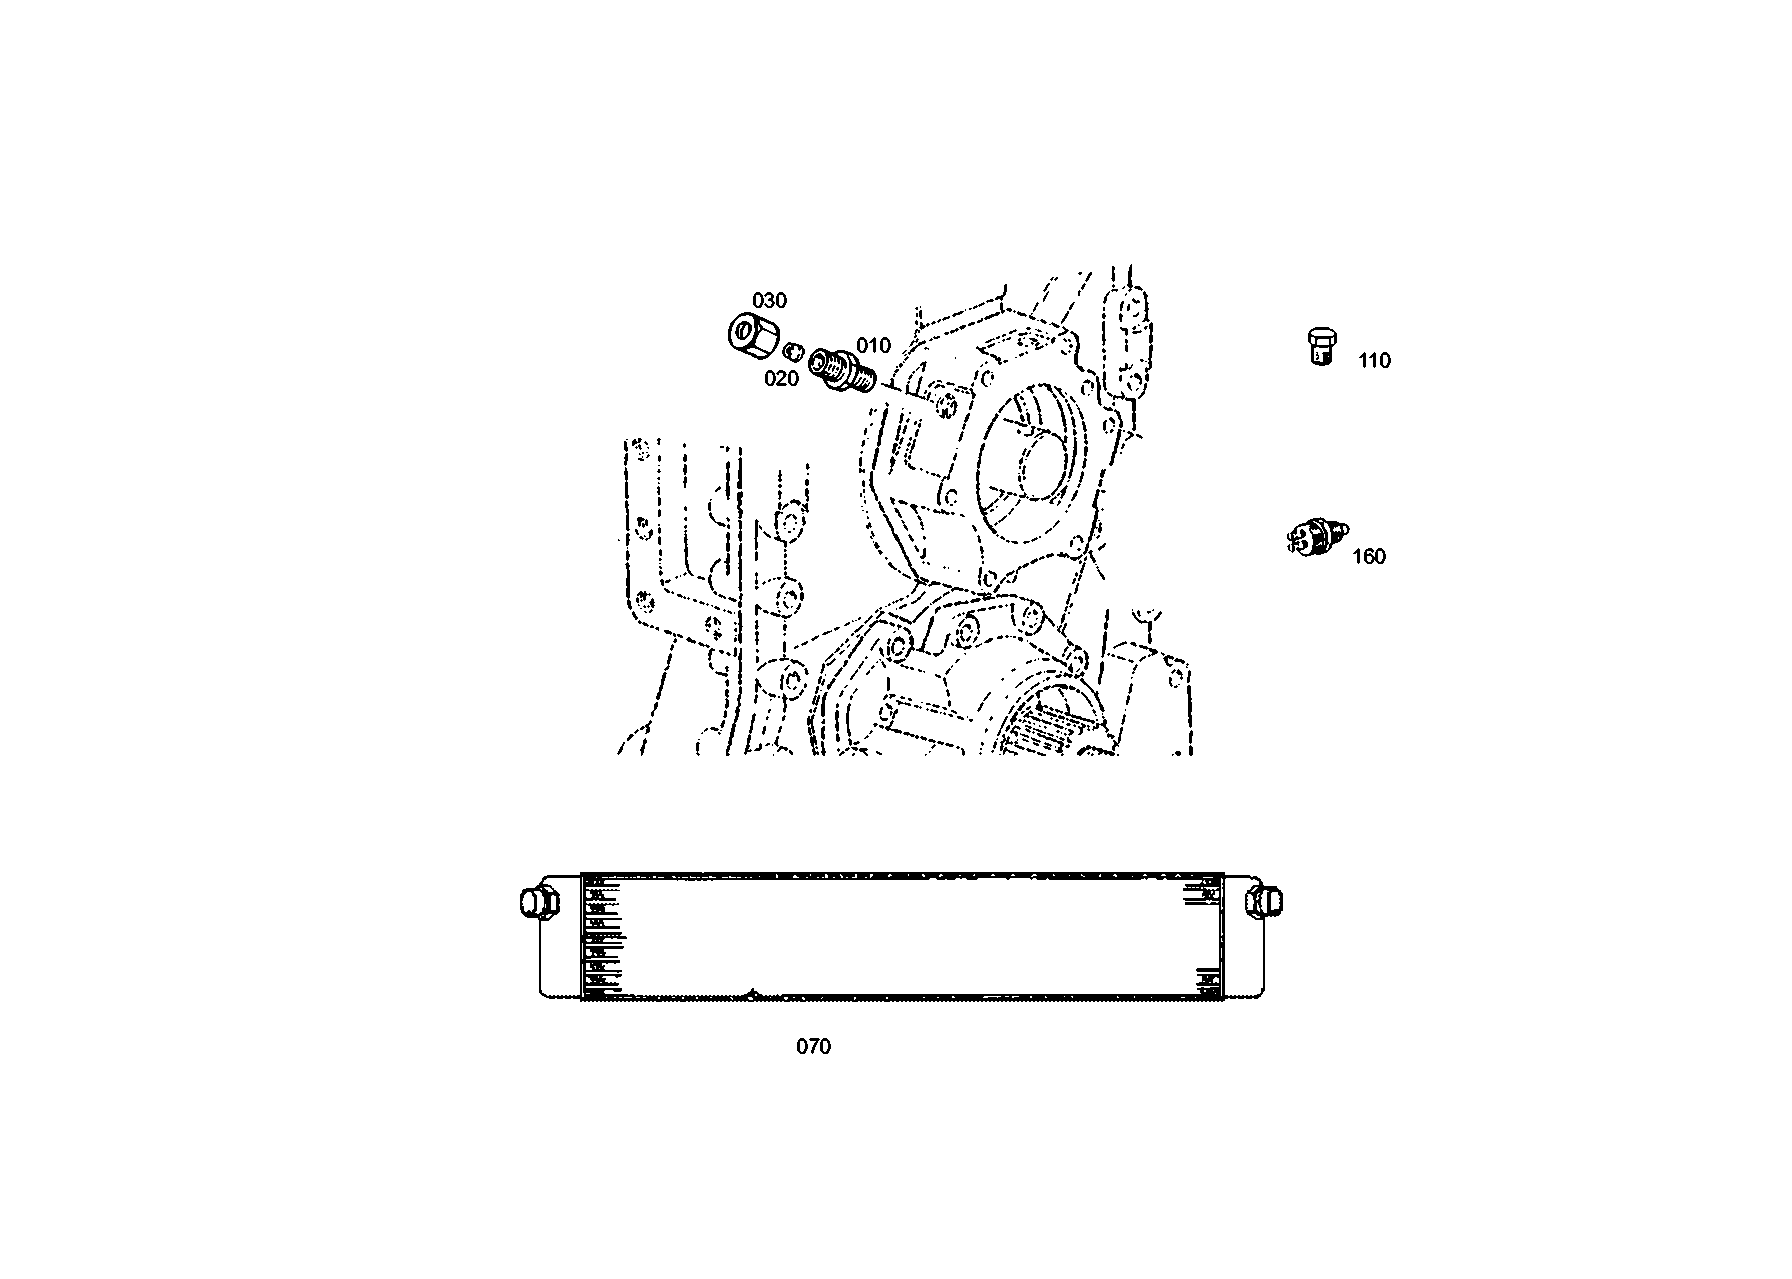 drawing for RABA 171200710001 - PRESSURE SWITCH (figure 4)